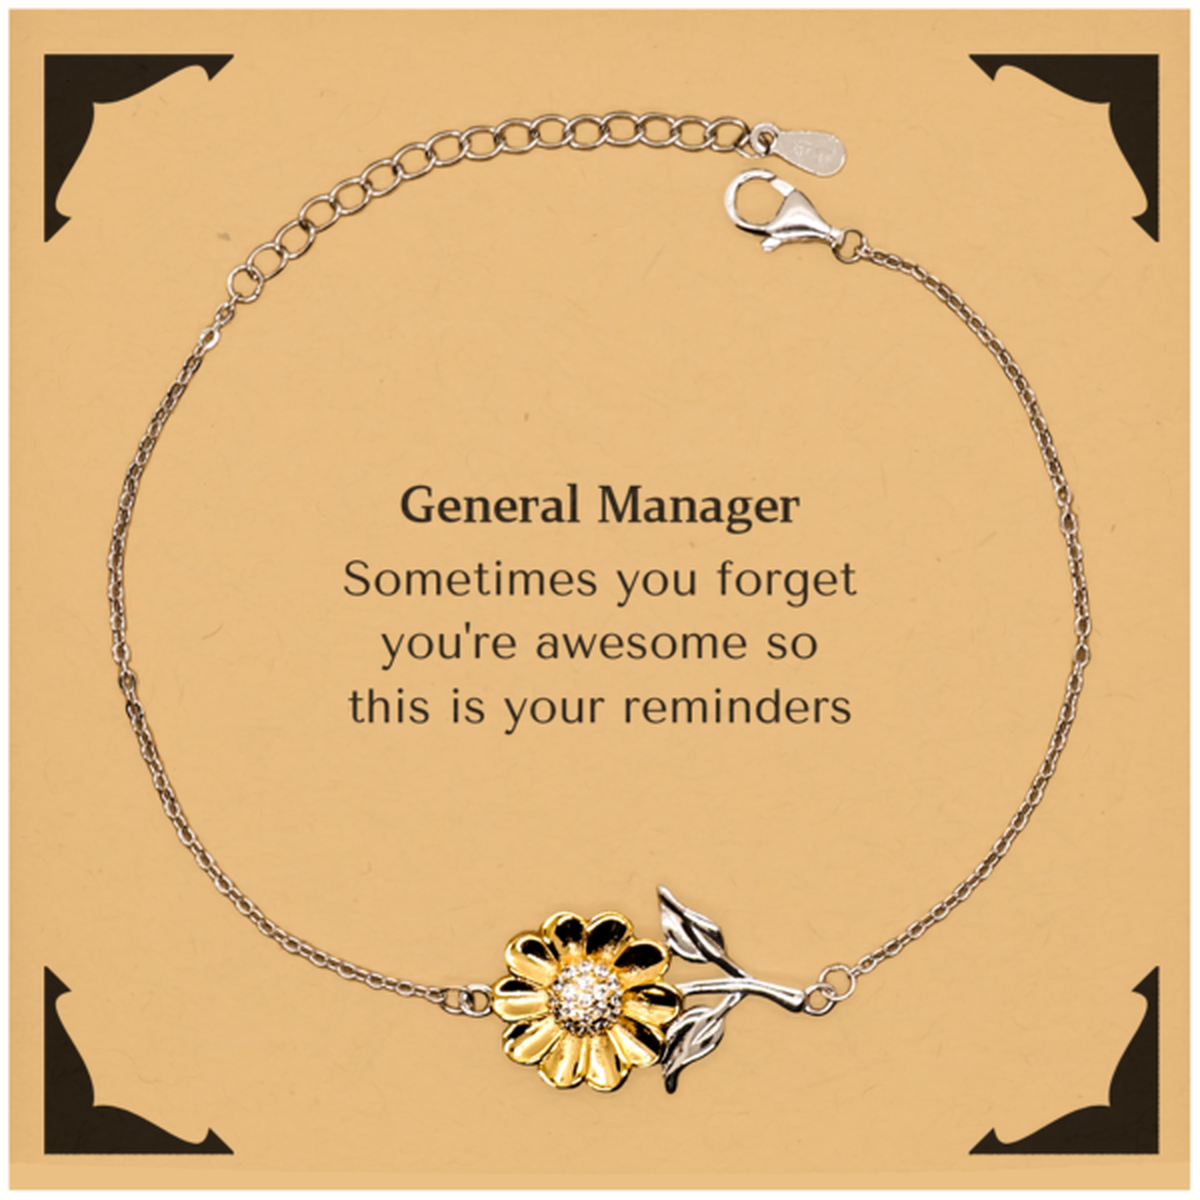 Sentimental General Manager Sunflower Bracelet, General Manager Sometimes you forget you're awesome so this is your reminders, Graduation Christmas Birthday Gifts for General Manager, Men, Women, Coworkers